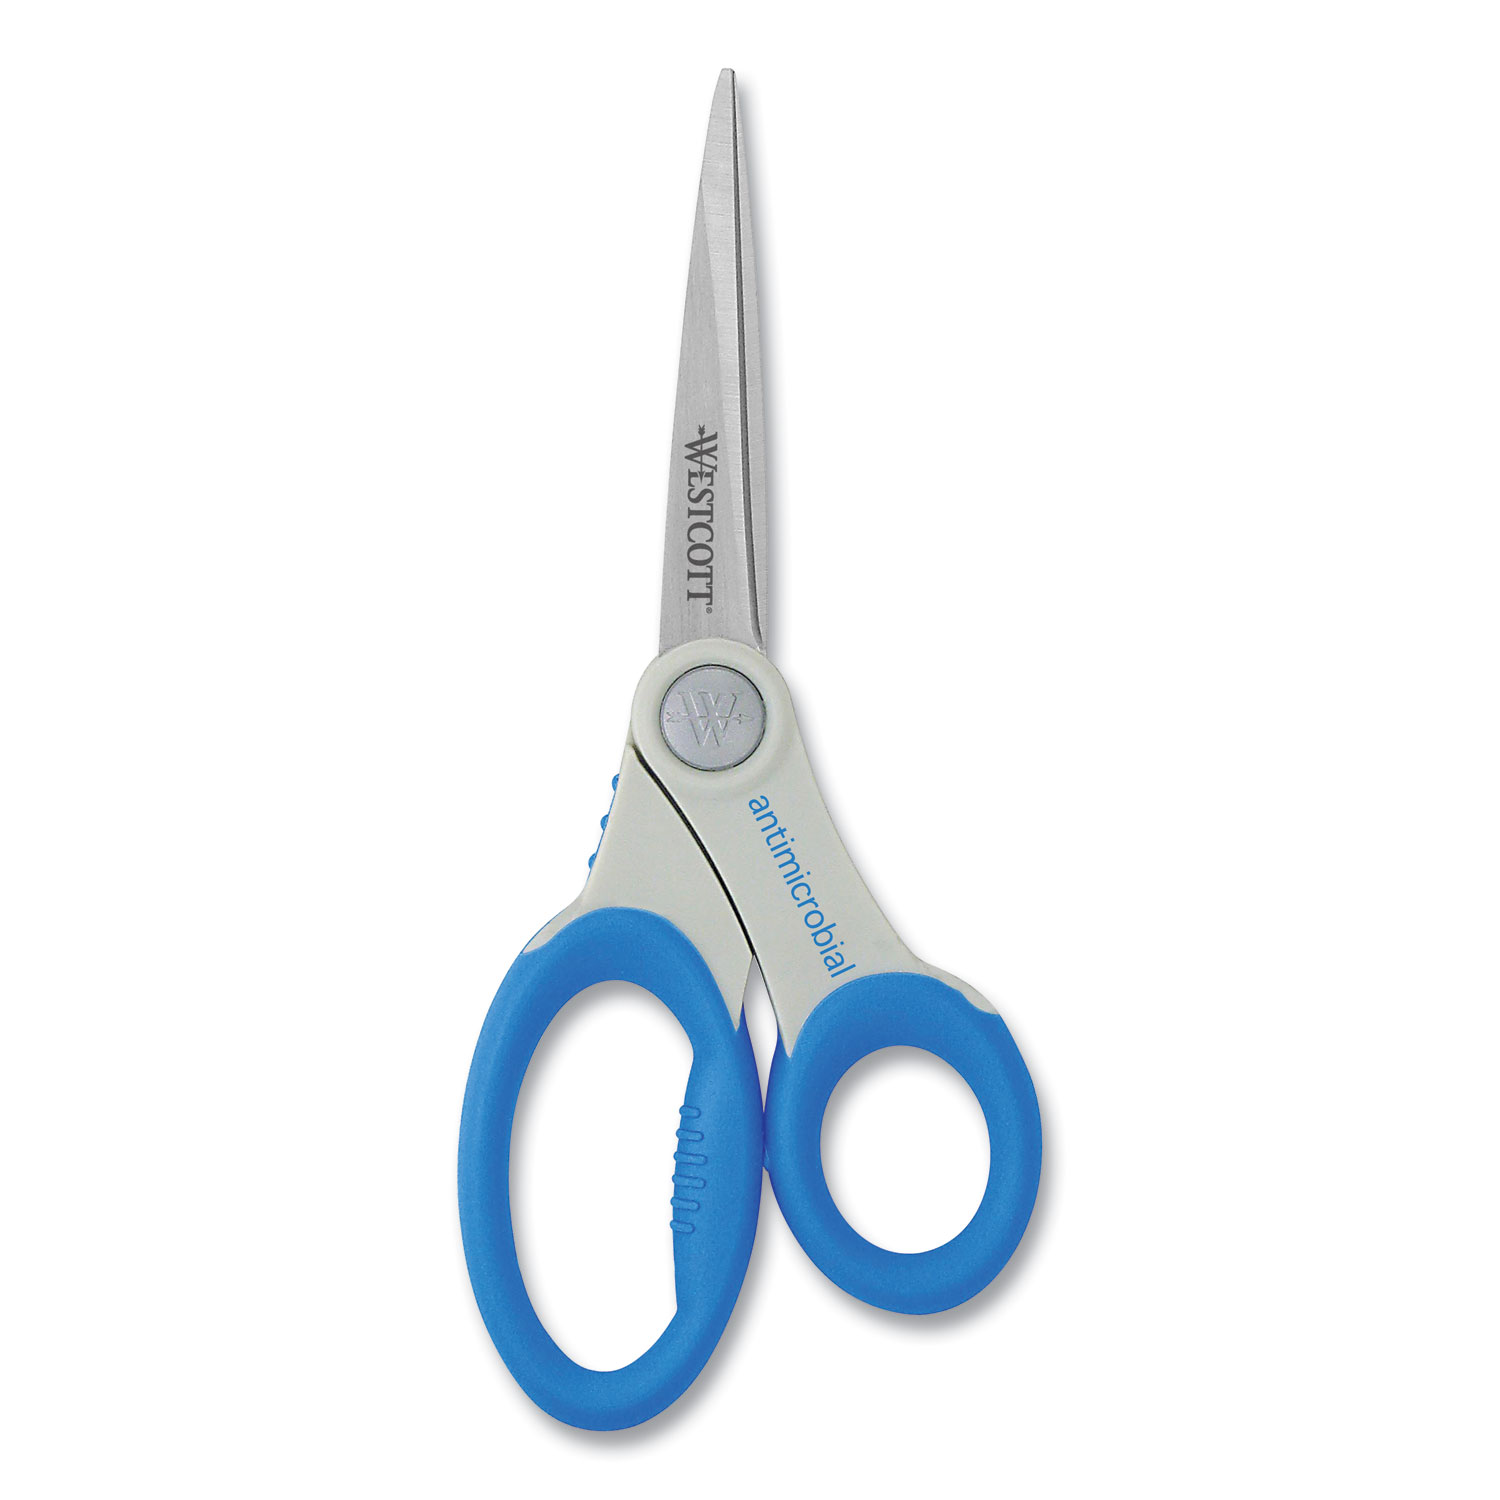  Westcott 14643 Scissors with Antimicrobial Protection, 8 Long, 3.5 Cut Length, Blue Straight Handle (ACM14643) 